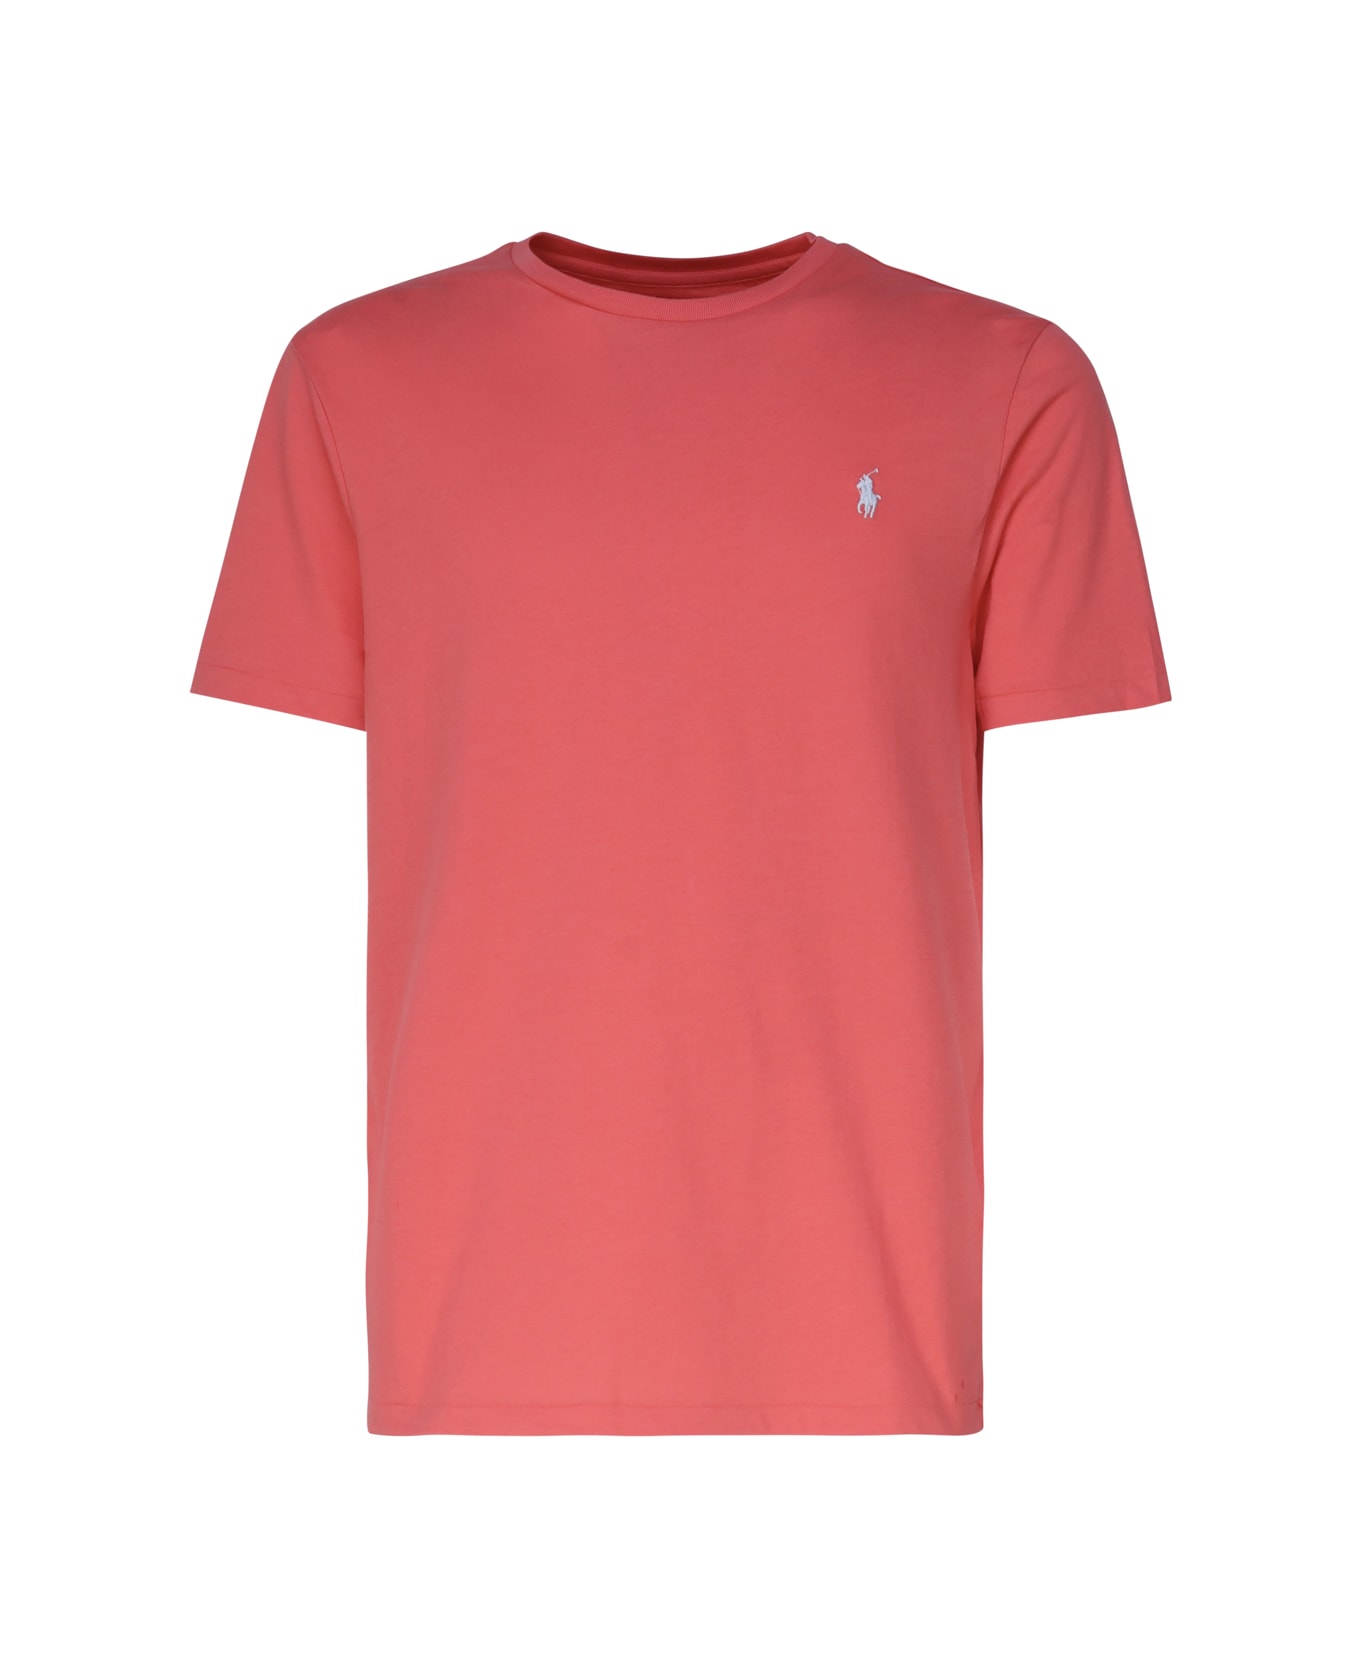 Polo Ralph Lauren Polo Pony T-shirt - Red